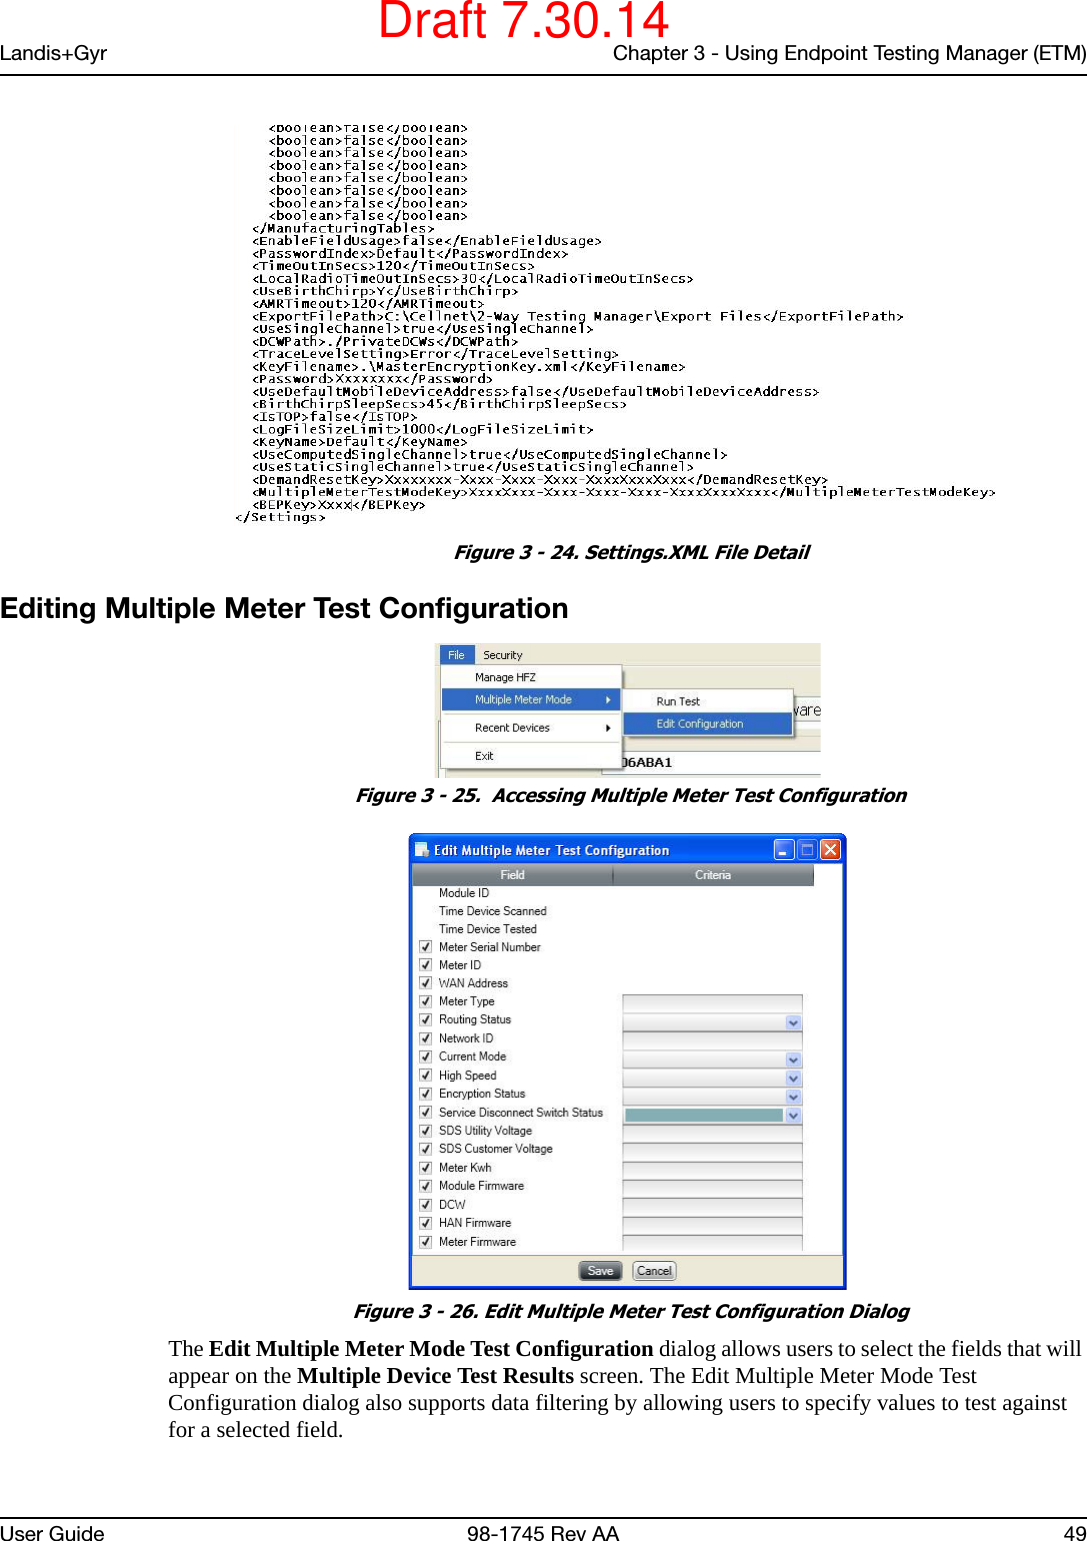 Landis+Gyr Chapter 3 - Using Endpoint Testing Manager (ETM)User Guide 98-1745 Rev AA 49 Figure 3 - 24. Settings.XML File DetailEditing Multiple Meter Test Configuration Figure 3 - 25.  Accessing Multiple Meter Test Configuration Figure 3 - 26. Edit Multiple Meter Test Configuration DialogThe Edit Multiple Meter Mode Test Configuration dialog allows users to select the fields that will appear on the Multiple Device Test Results screen. The Edit Multiple Meter Mode Test Configuration dialog also supports data filtering by allowing users to specify values to test against for a selected field. Draft 7.30.14